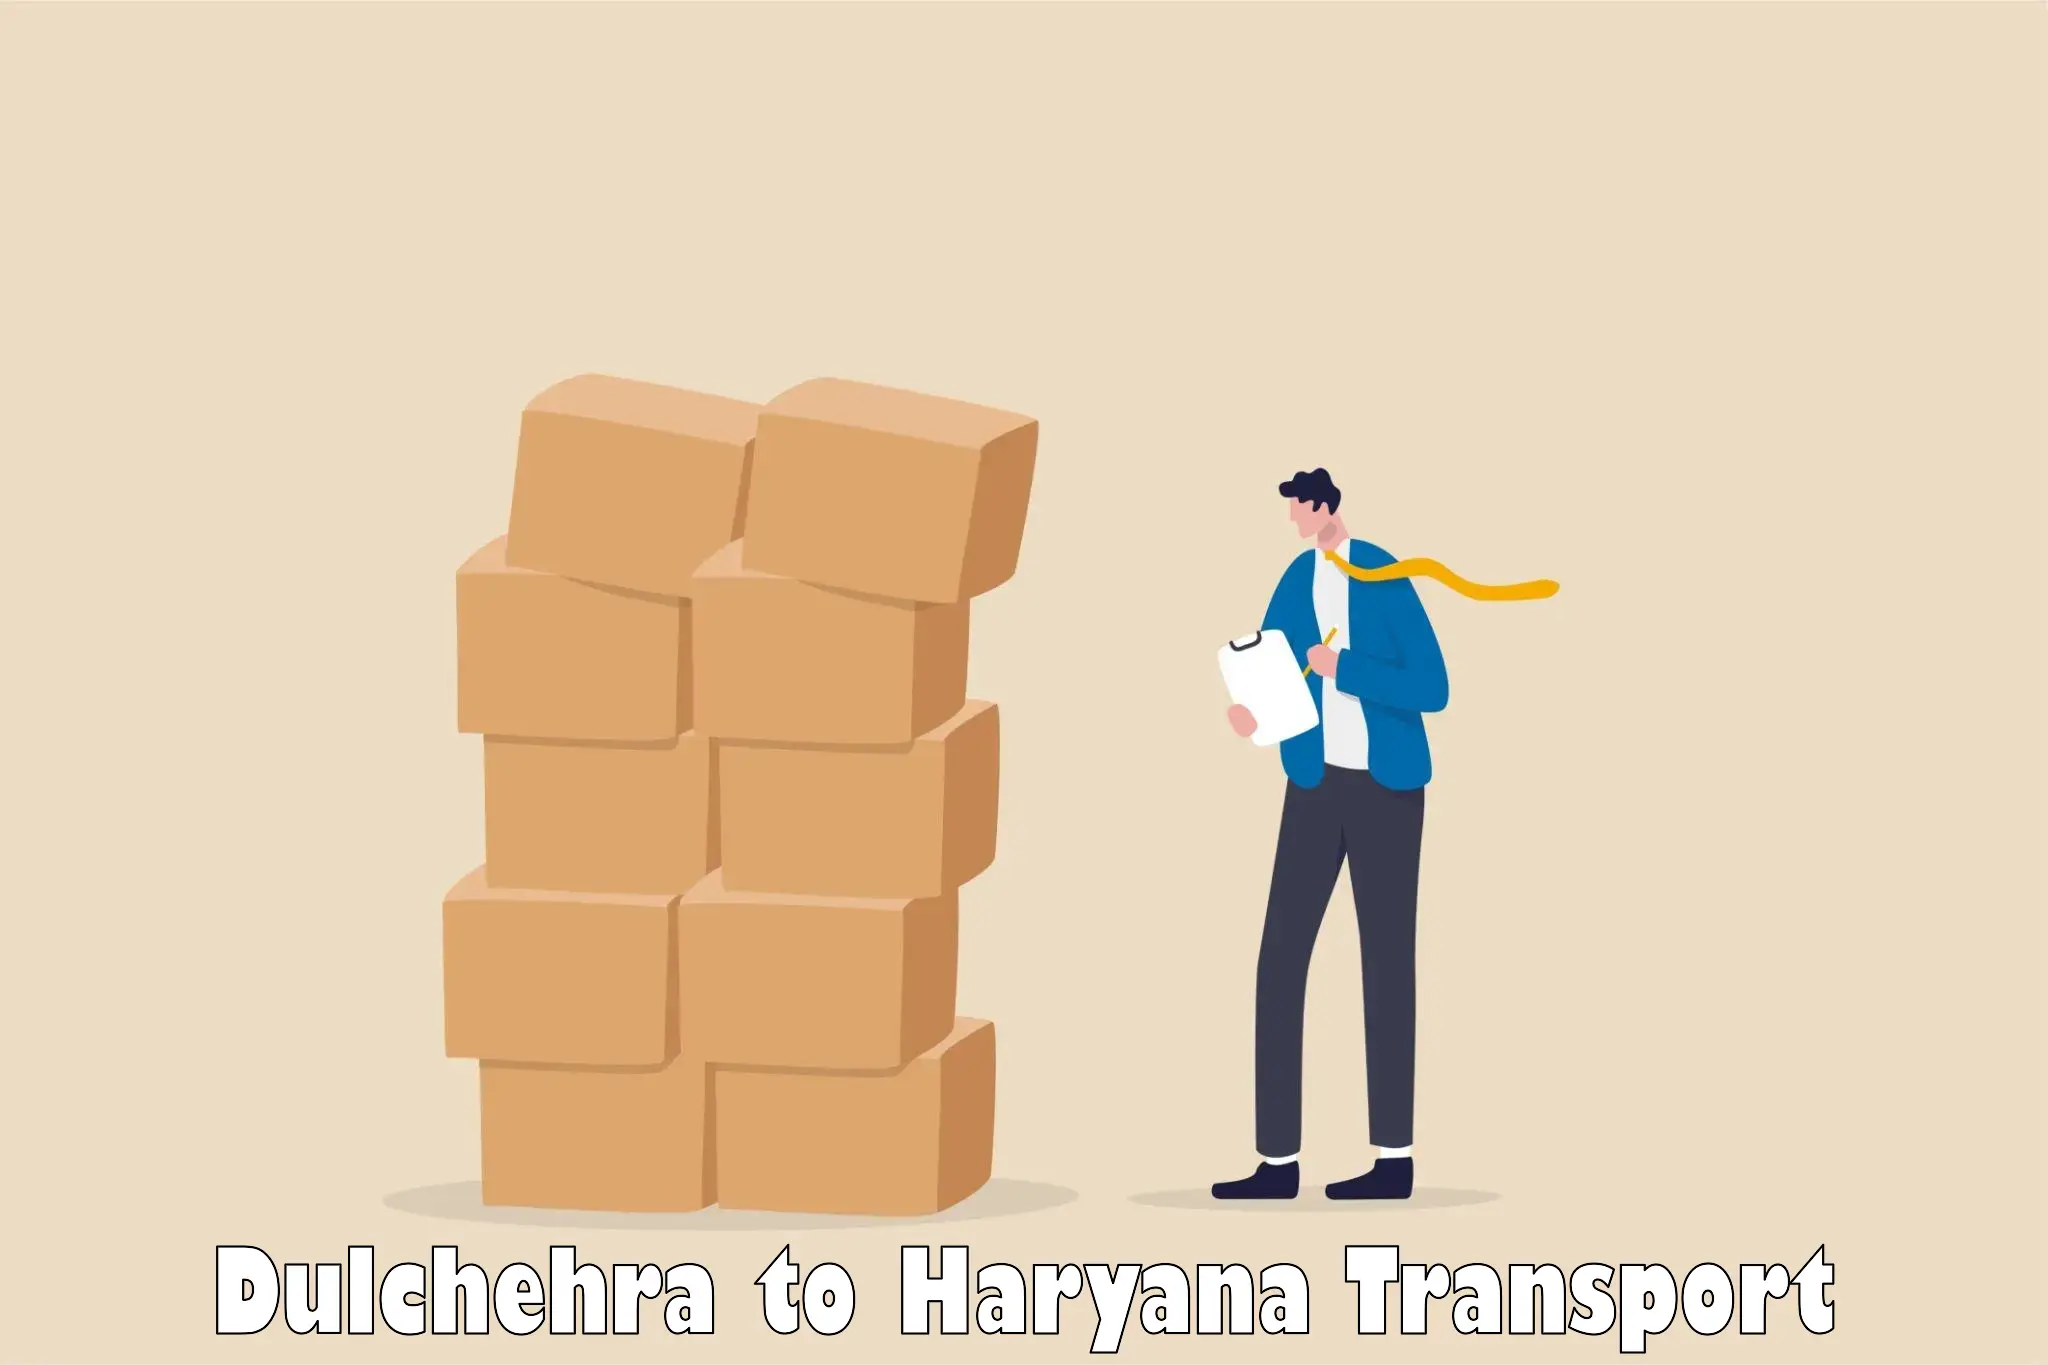 Daily transport service Dulchehra to Hodal